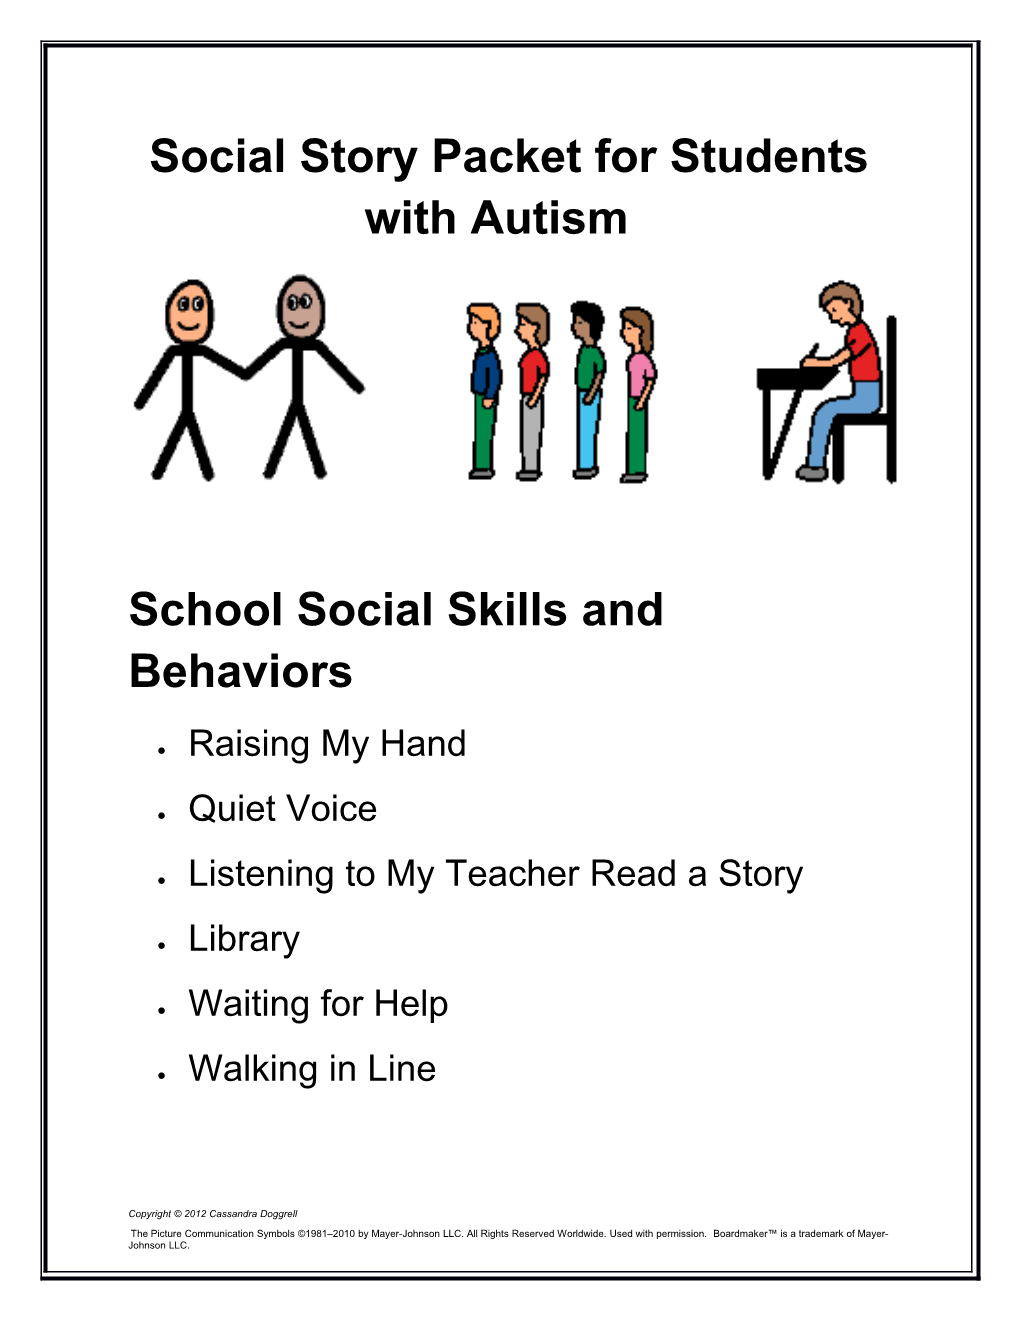 Social Story Packet for Students with Autism